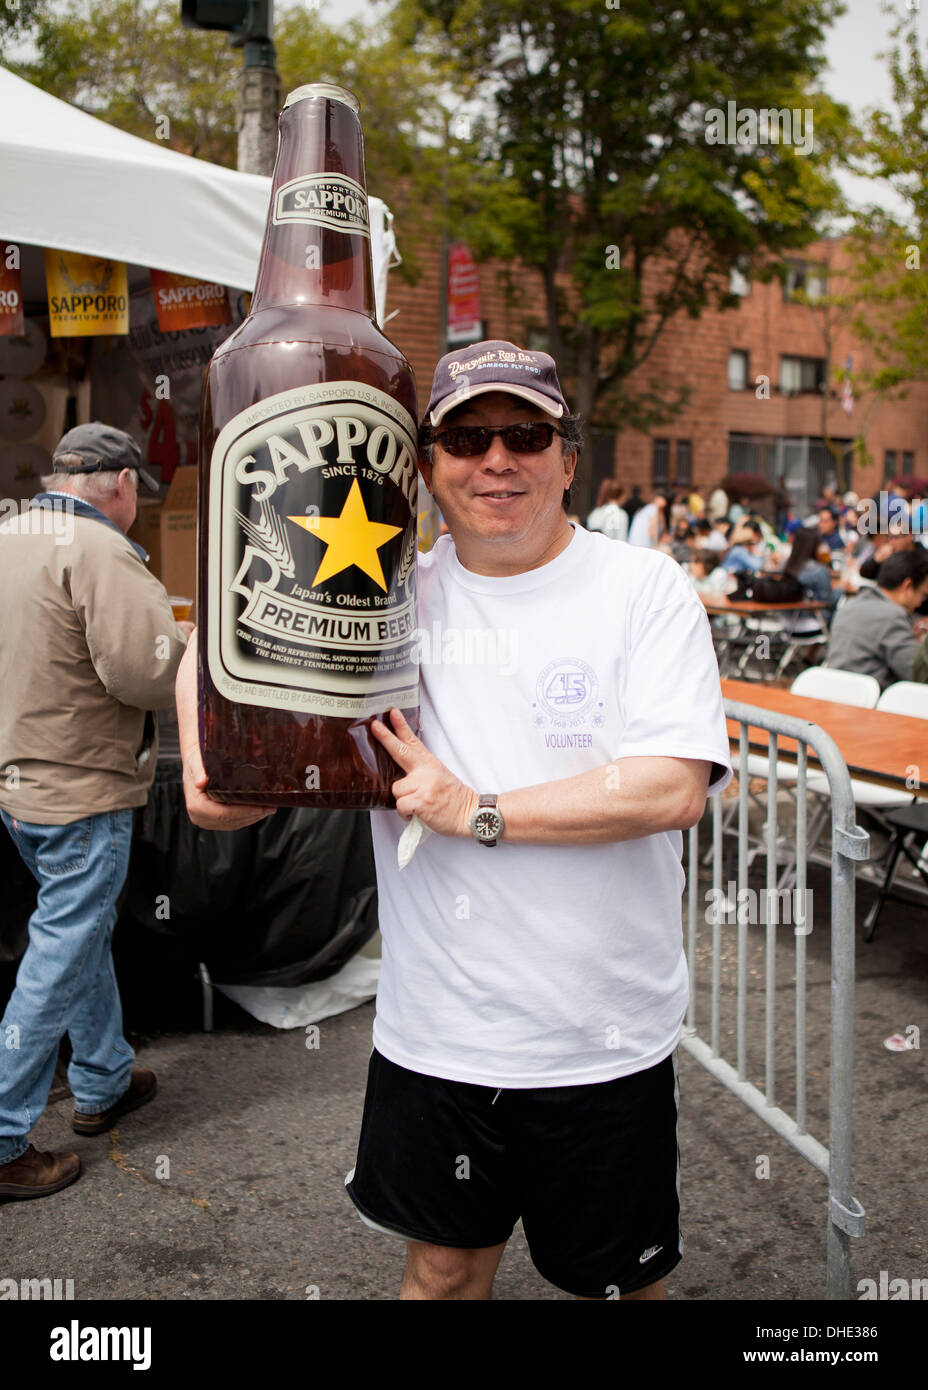 Japanese-American man holding large blowup Sapporo beer bottle at festival - San Francisco, California USA Stock Photo